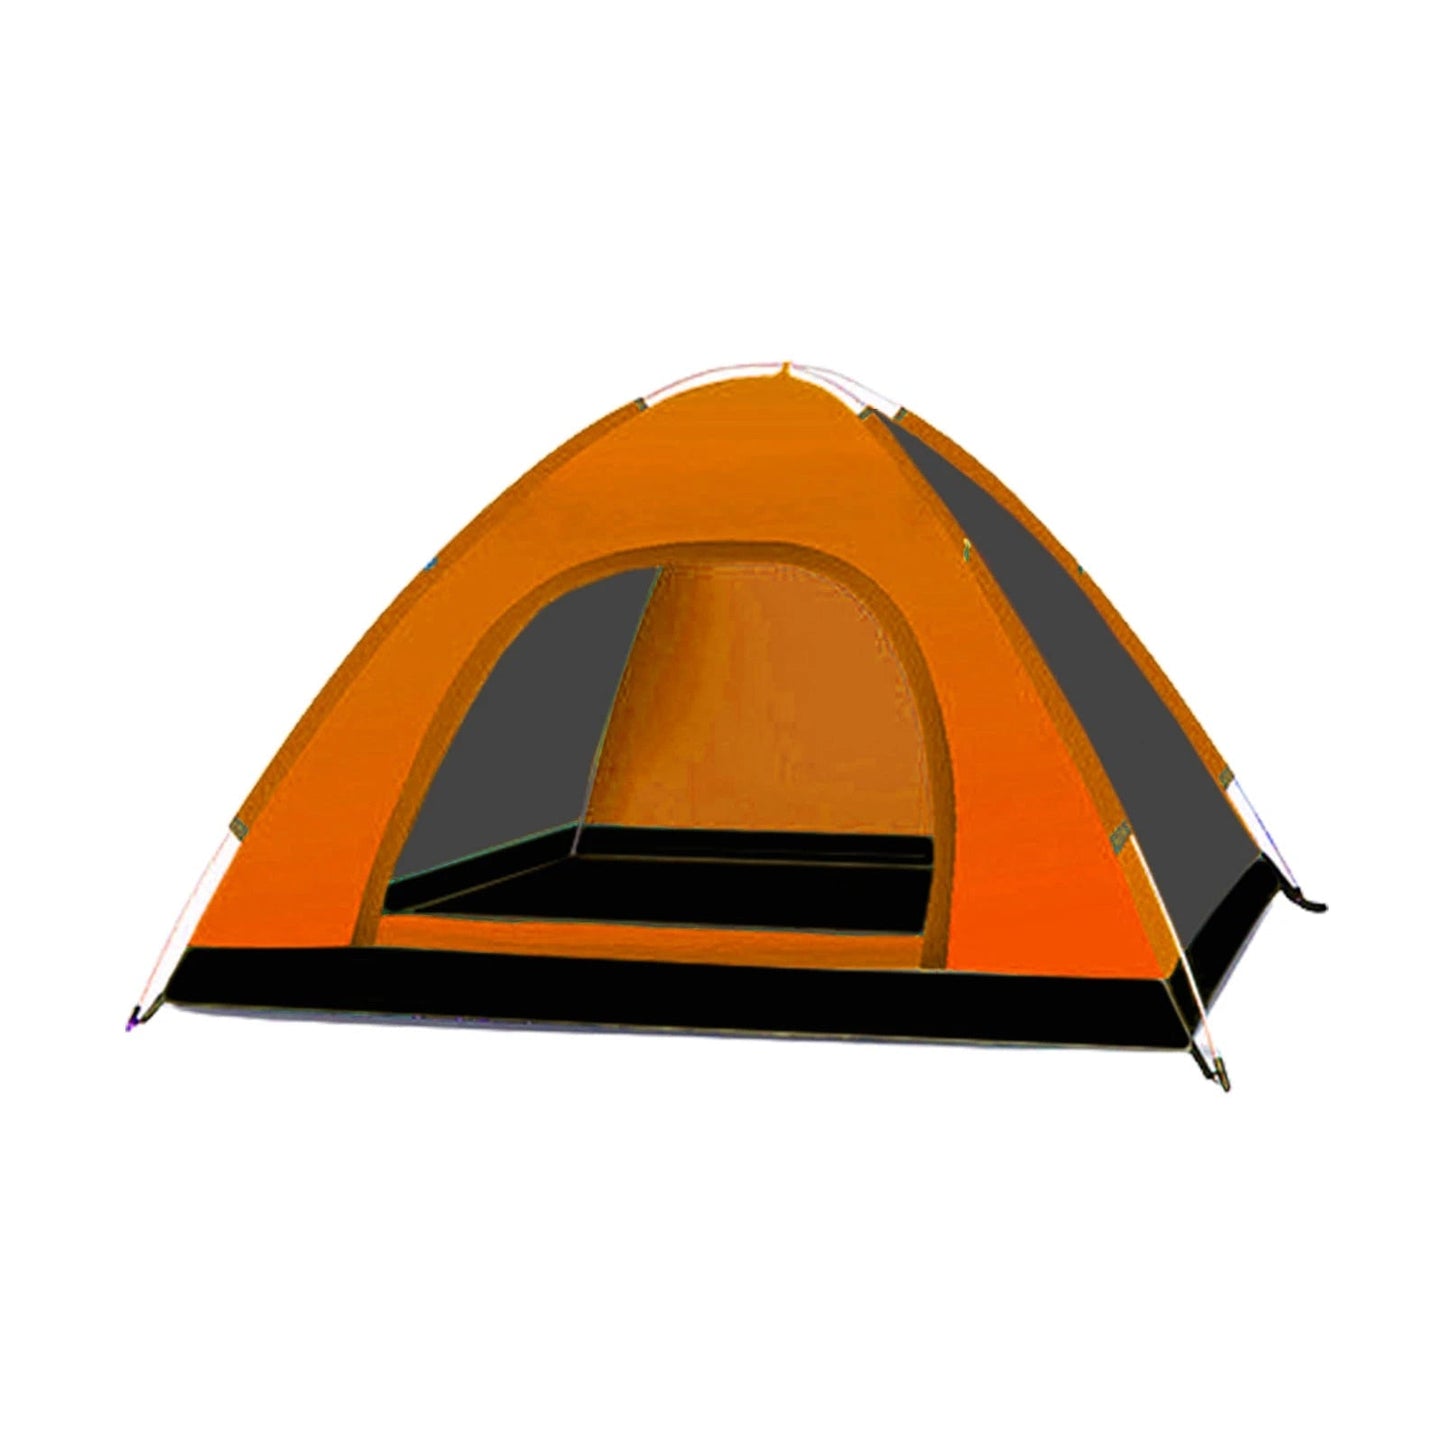 Outdoor Camping Tent Family Hiking Woods 3 Person Camping Tent Multi Colours 3529 (Parcel Rate)